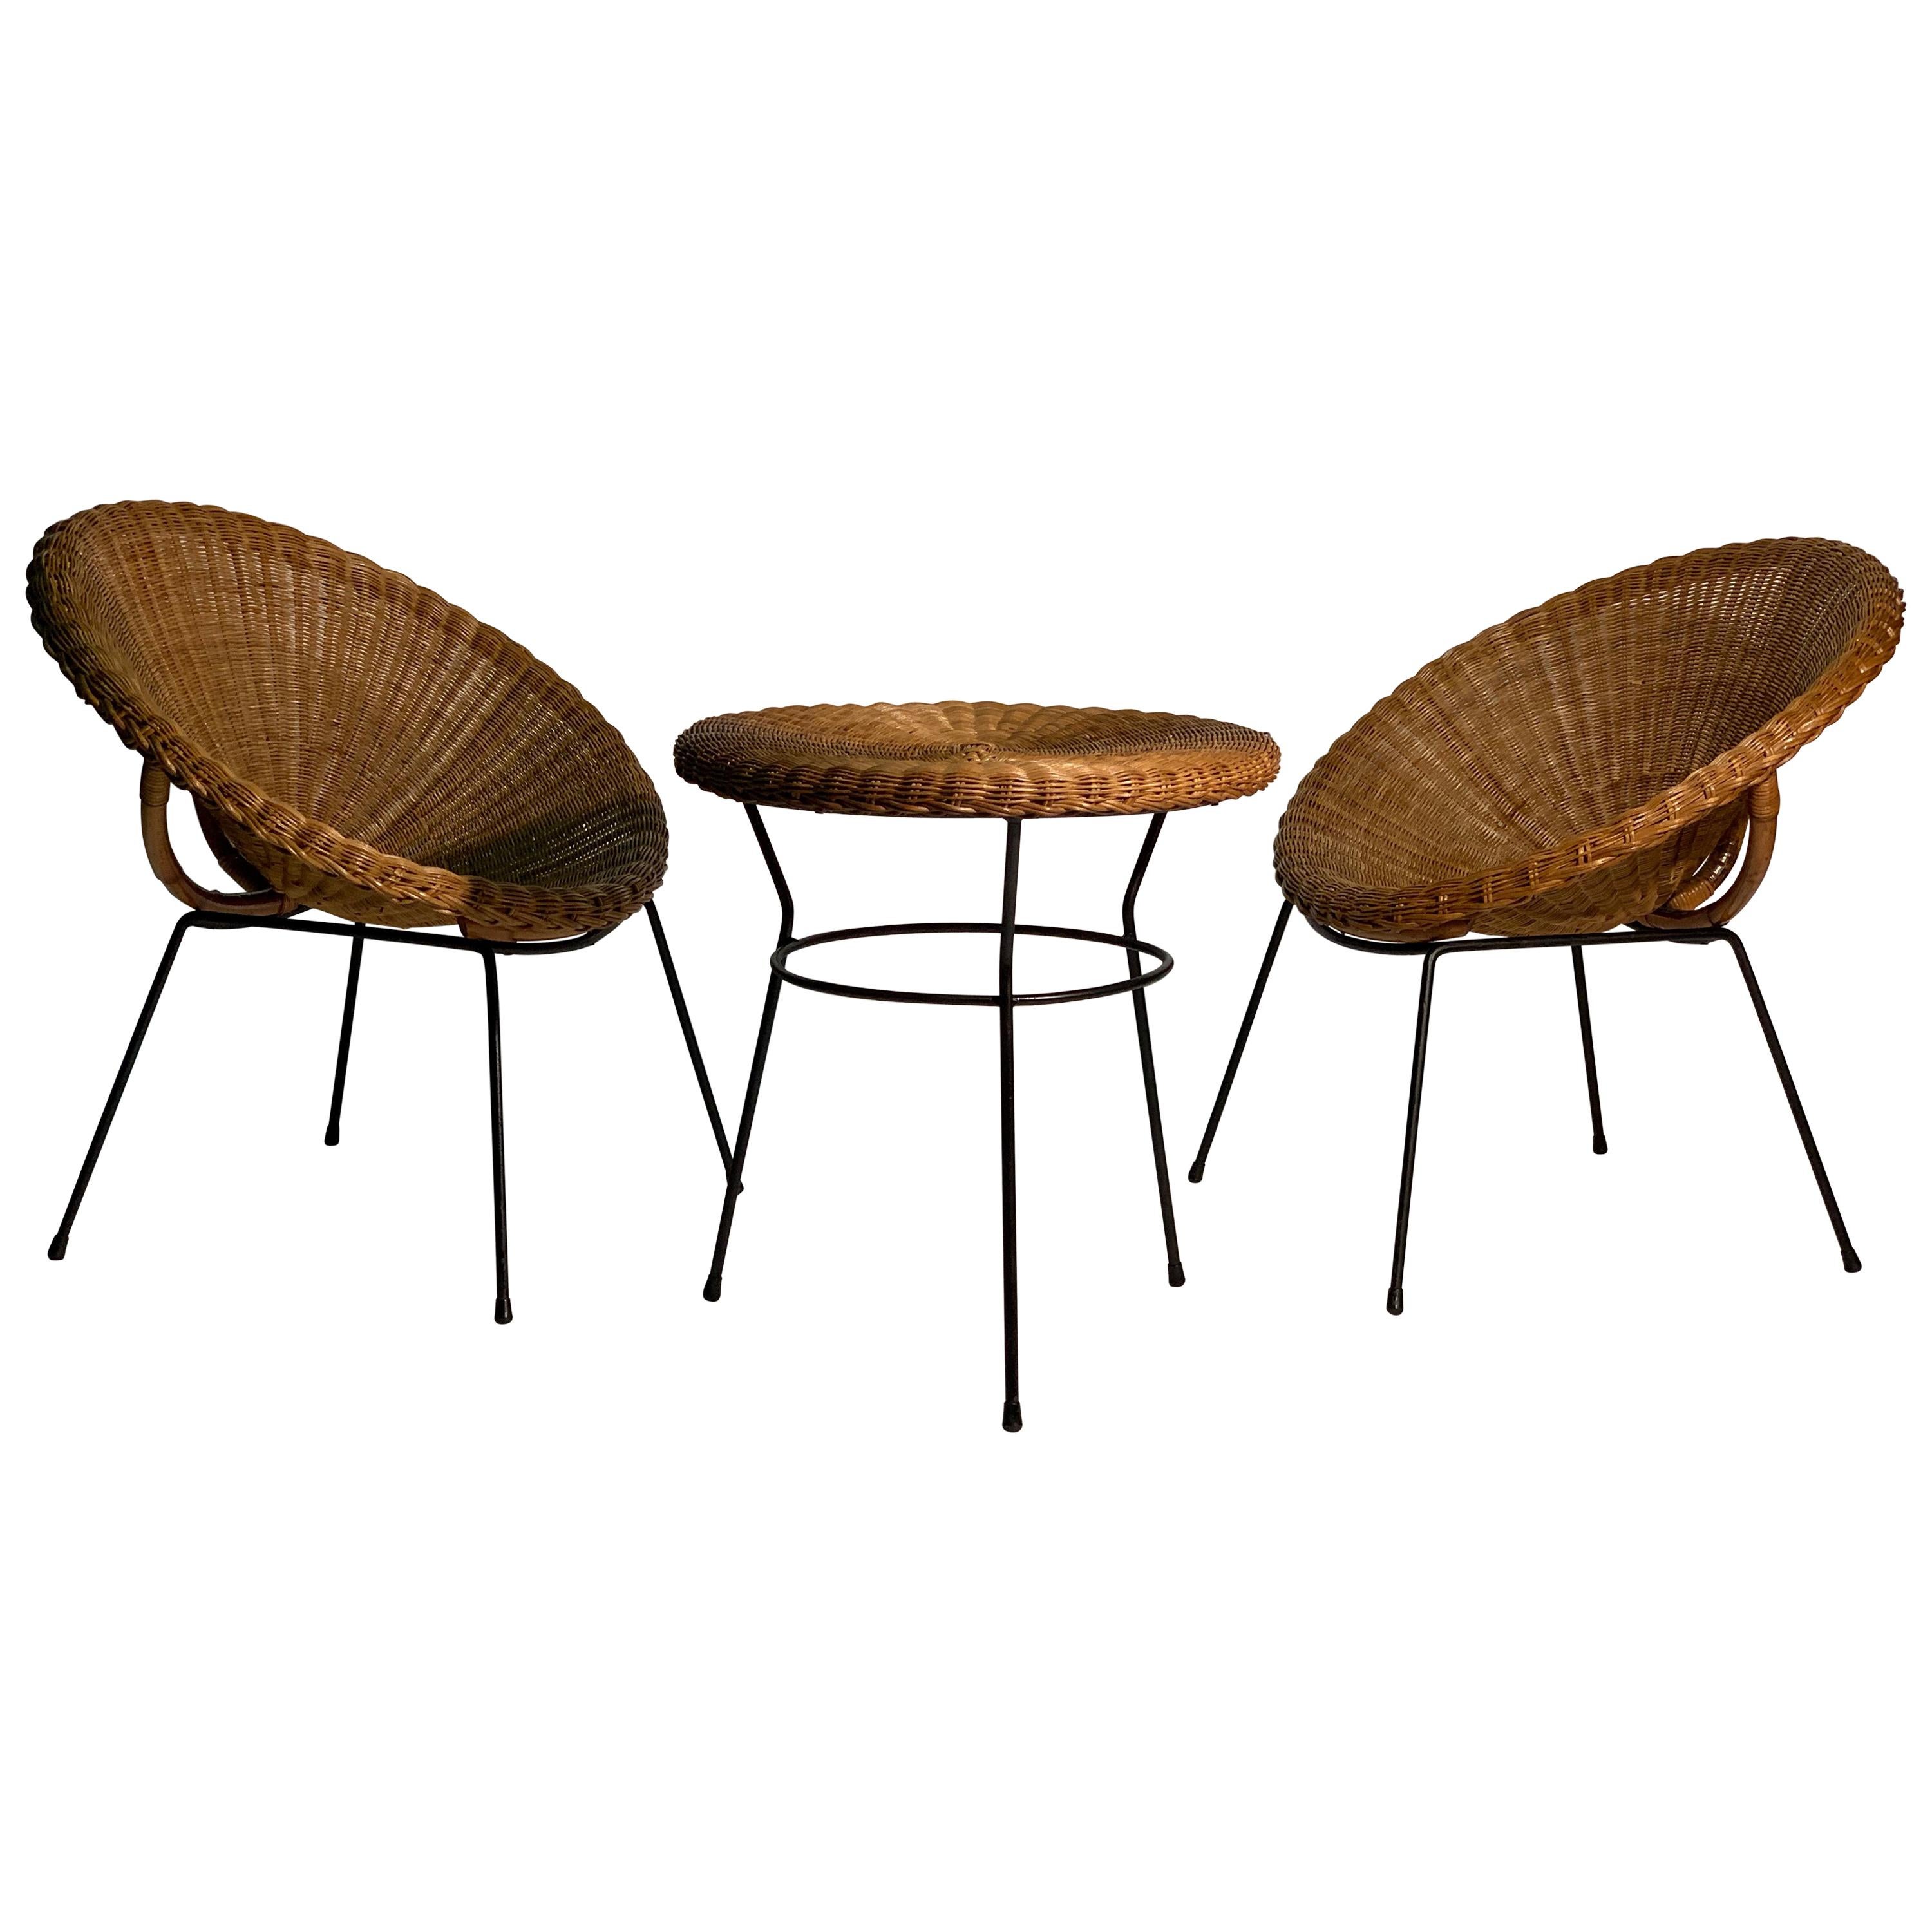 Midcentury Italian Rattan and Bamboo Pair of Armchairs and Table, 1950s